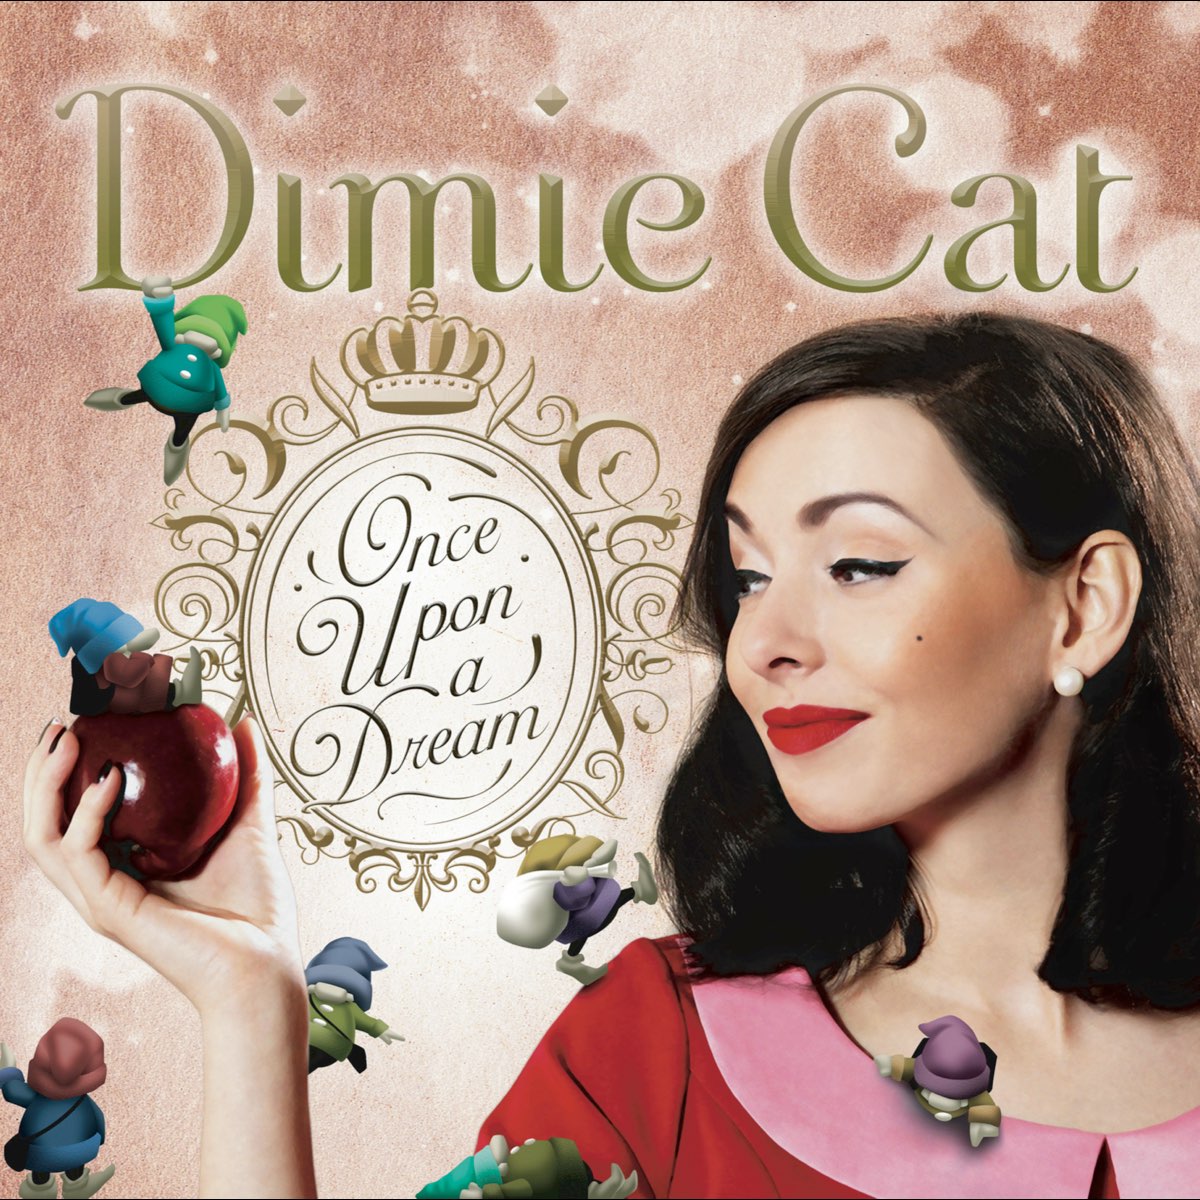 Once a cat. Zigzag Dimie Cat. Dimie Cat - Everybody wants to be a Cat. Once upon a Dream. Dimie Cat Википедия.